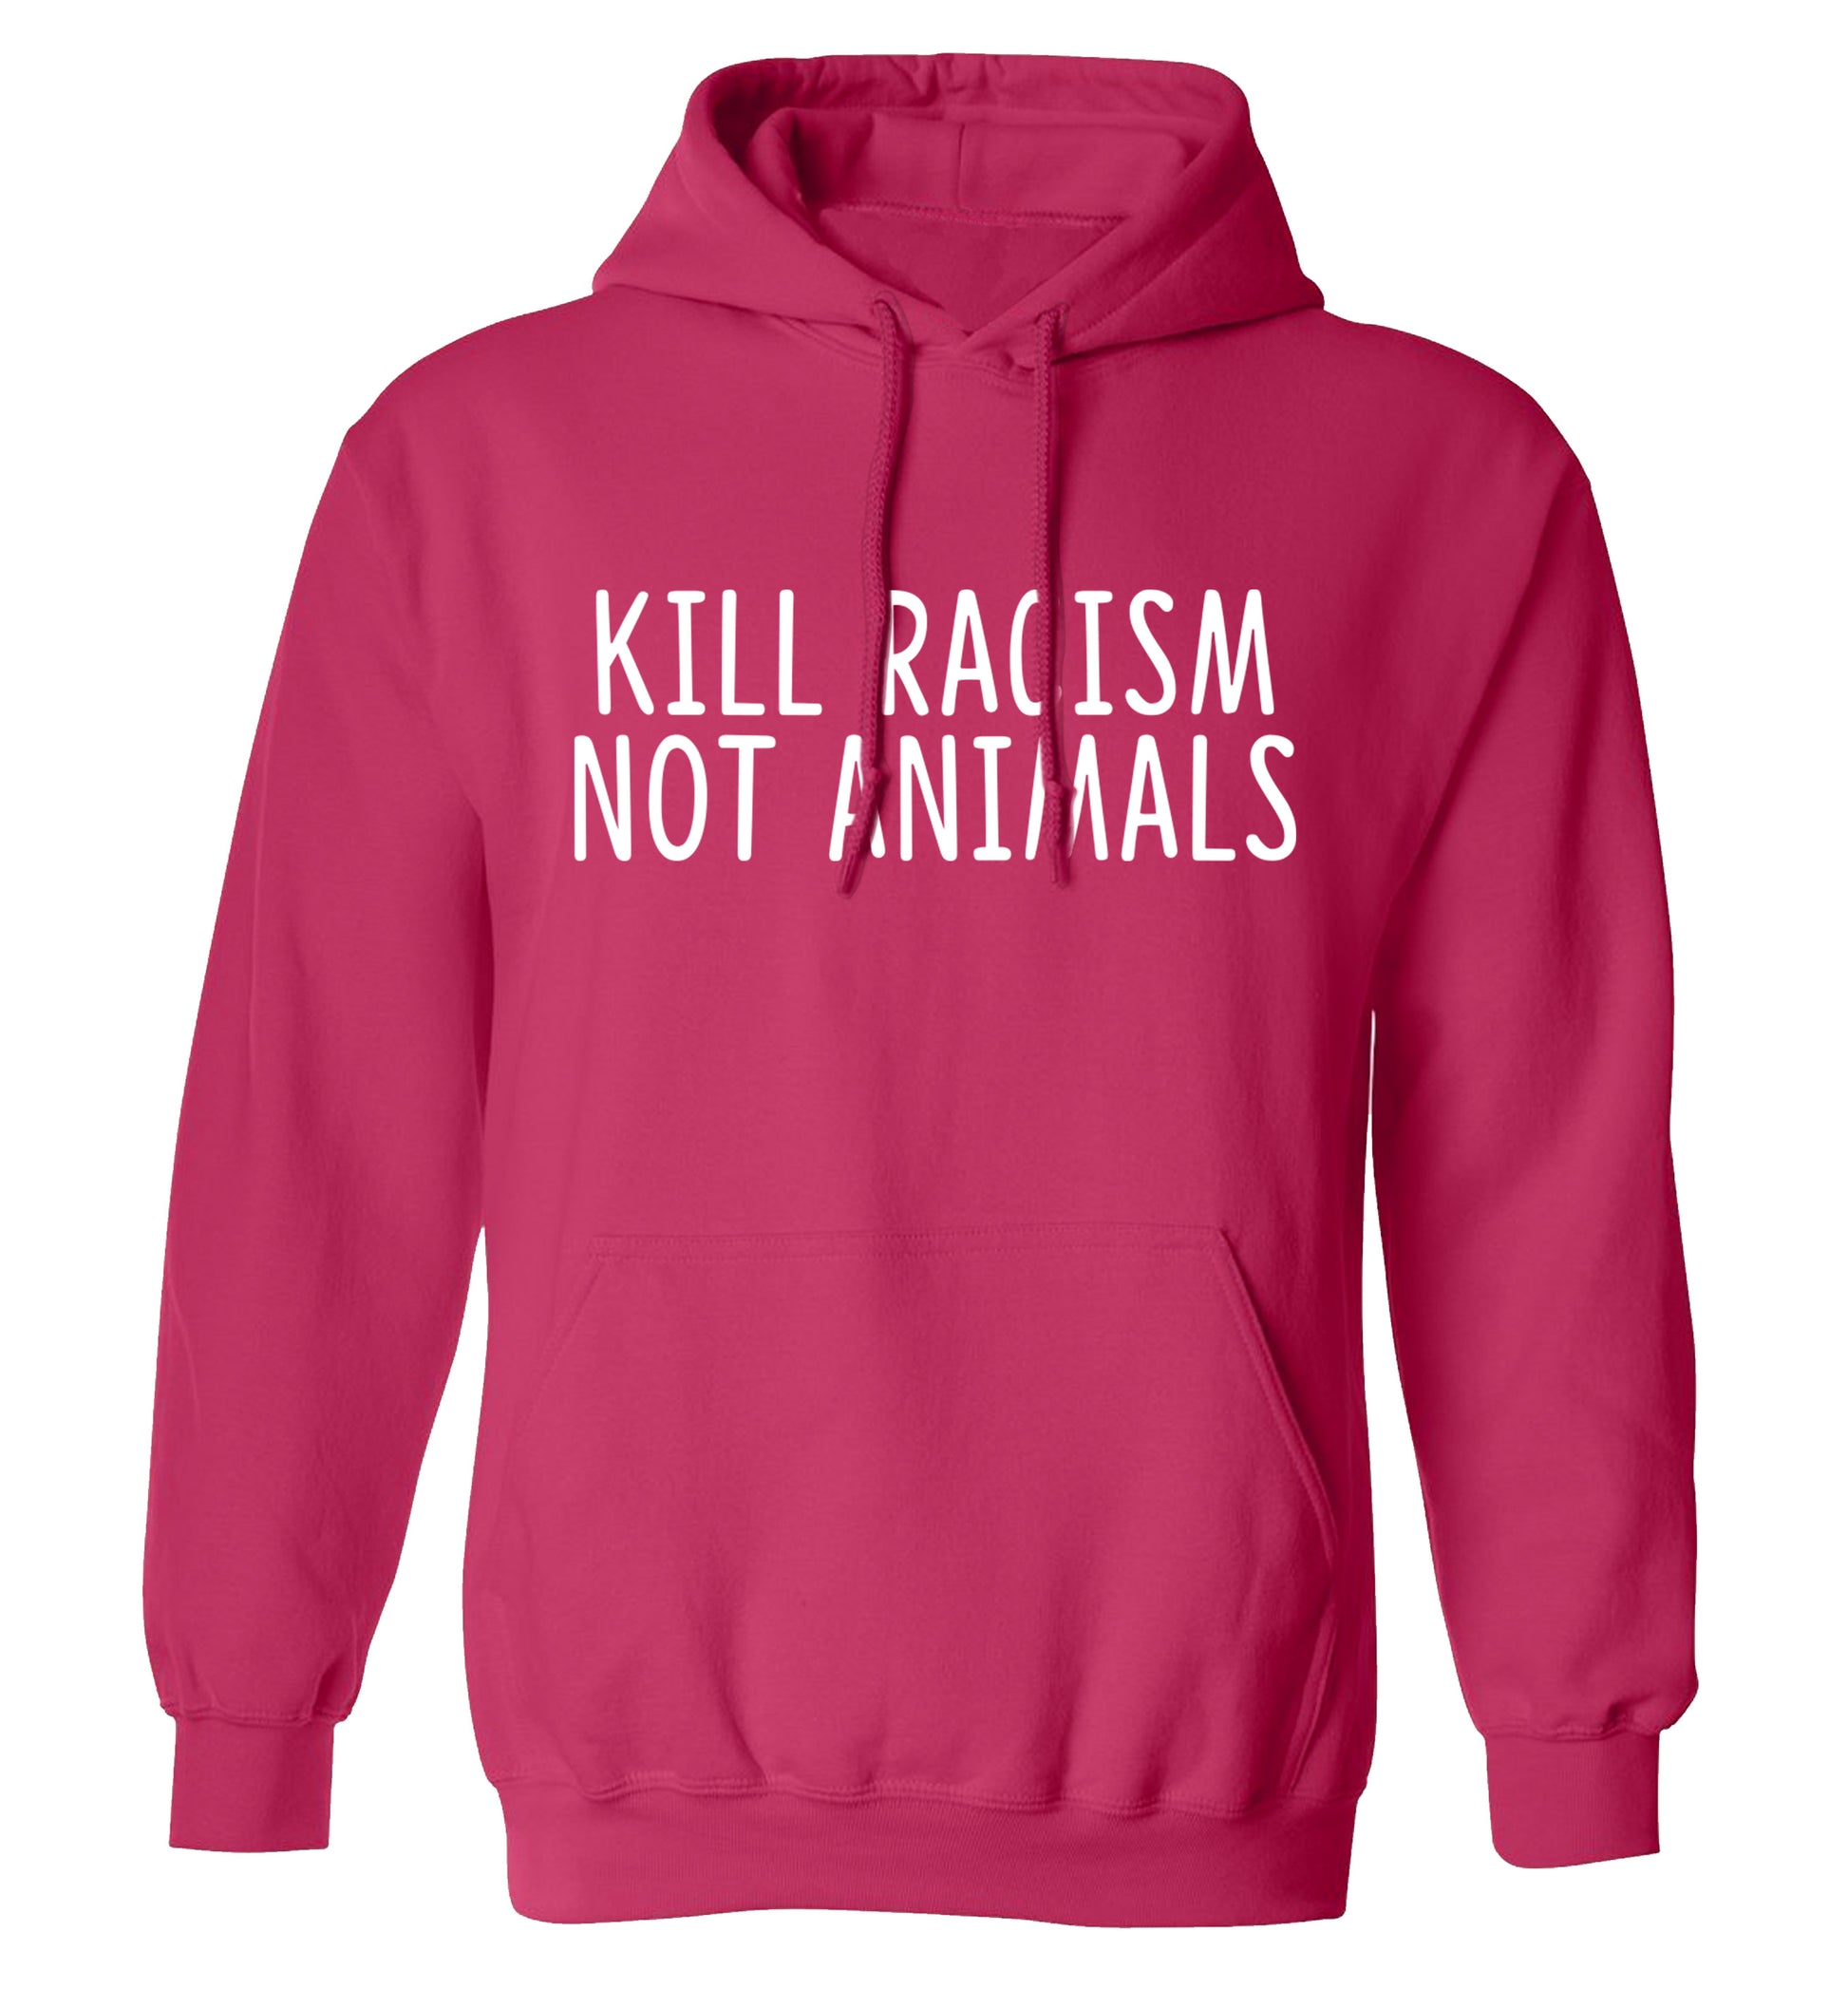 Kill Racism Not Animals adults unisex pink hoodie 2XL